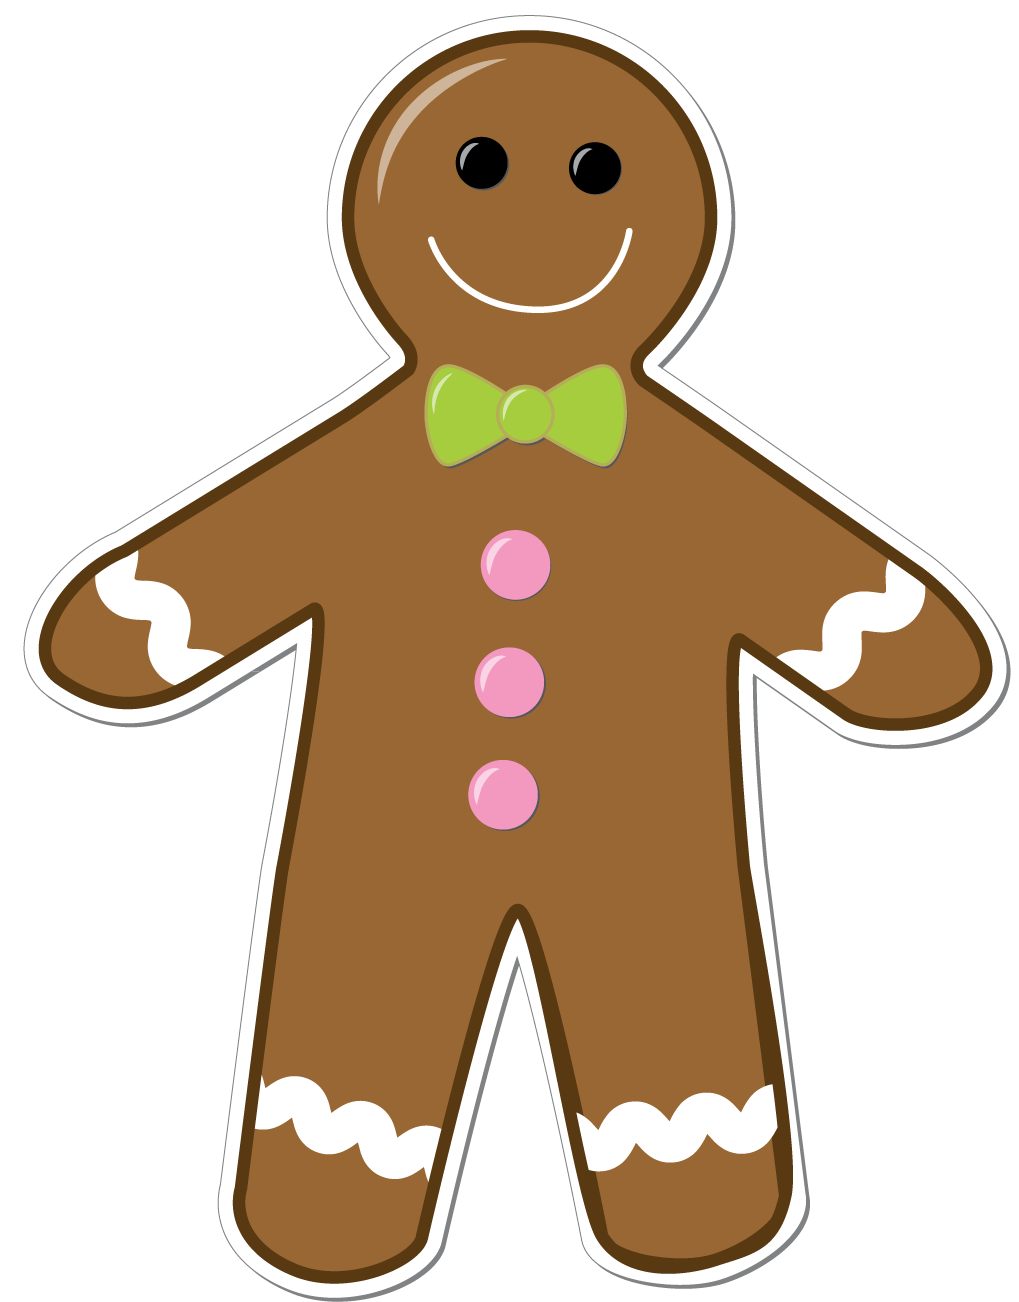 gingerbread house clipart | C